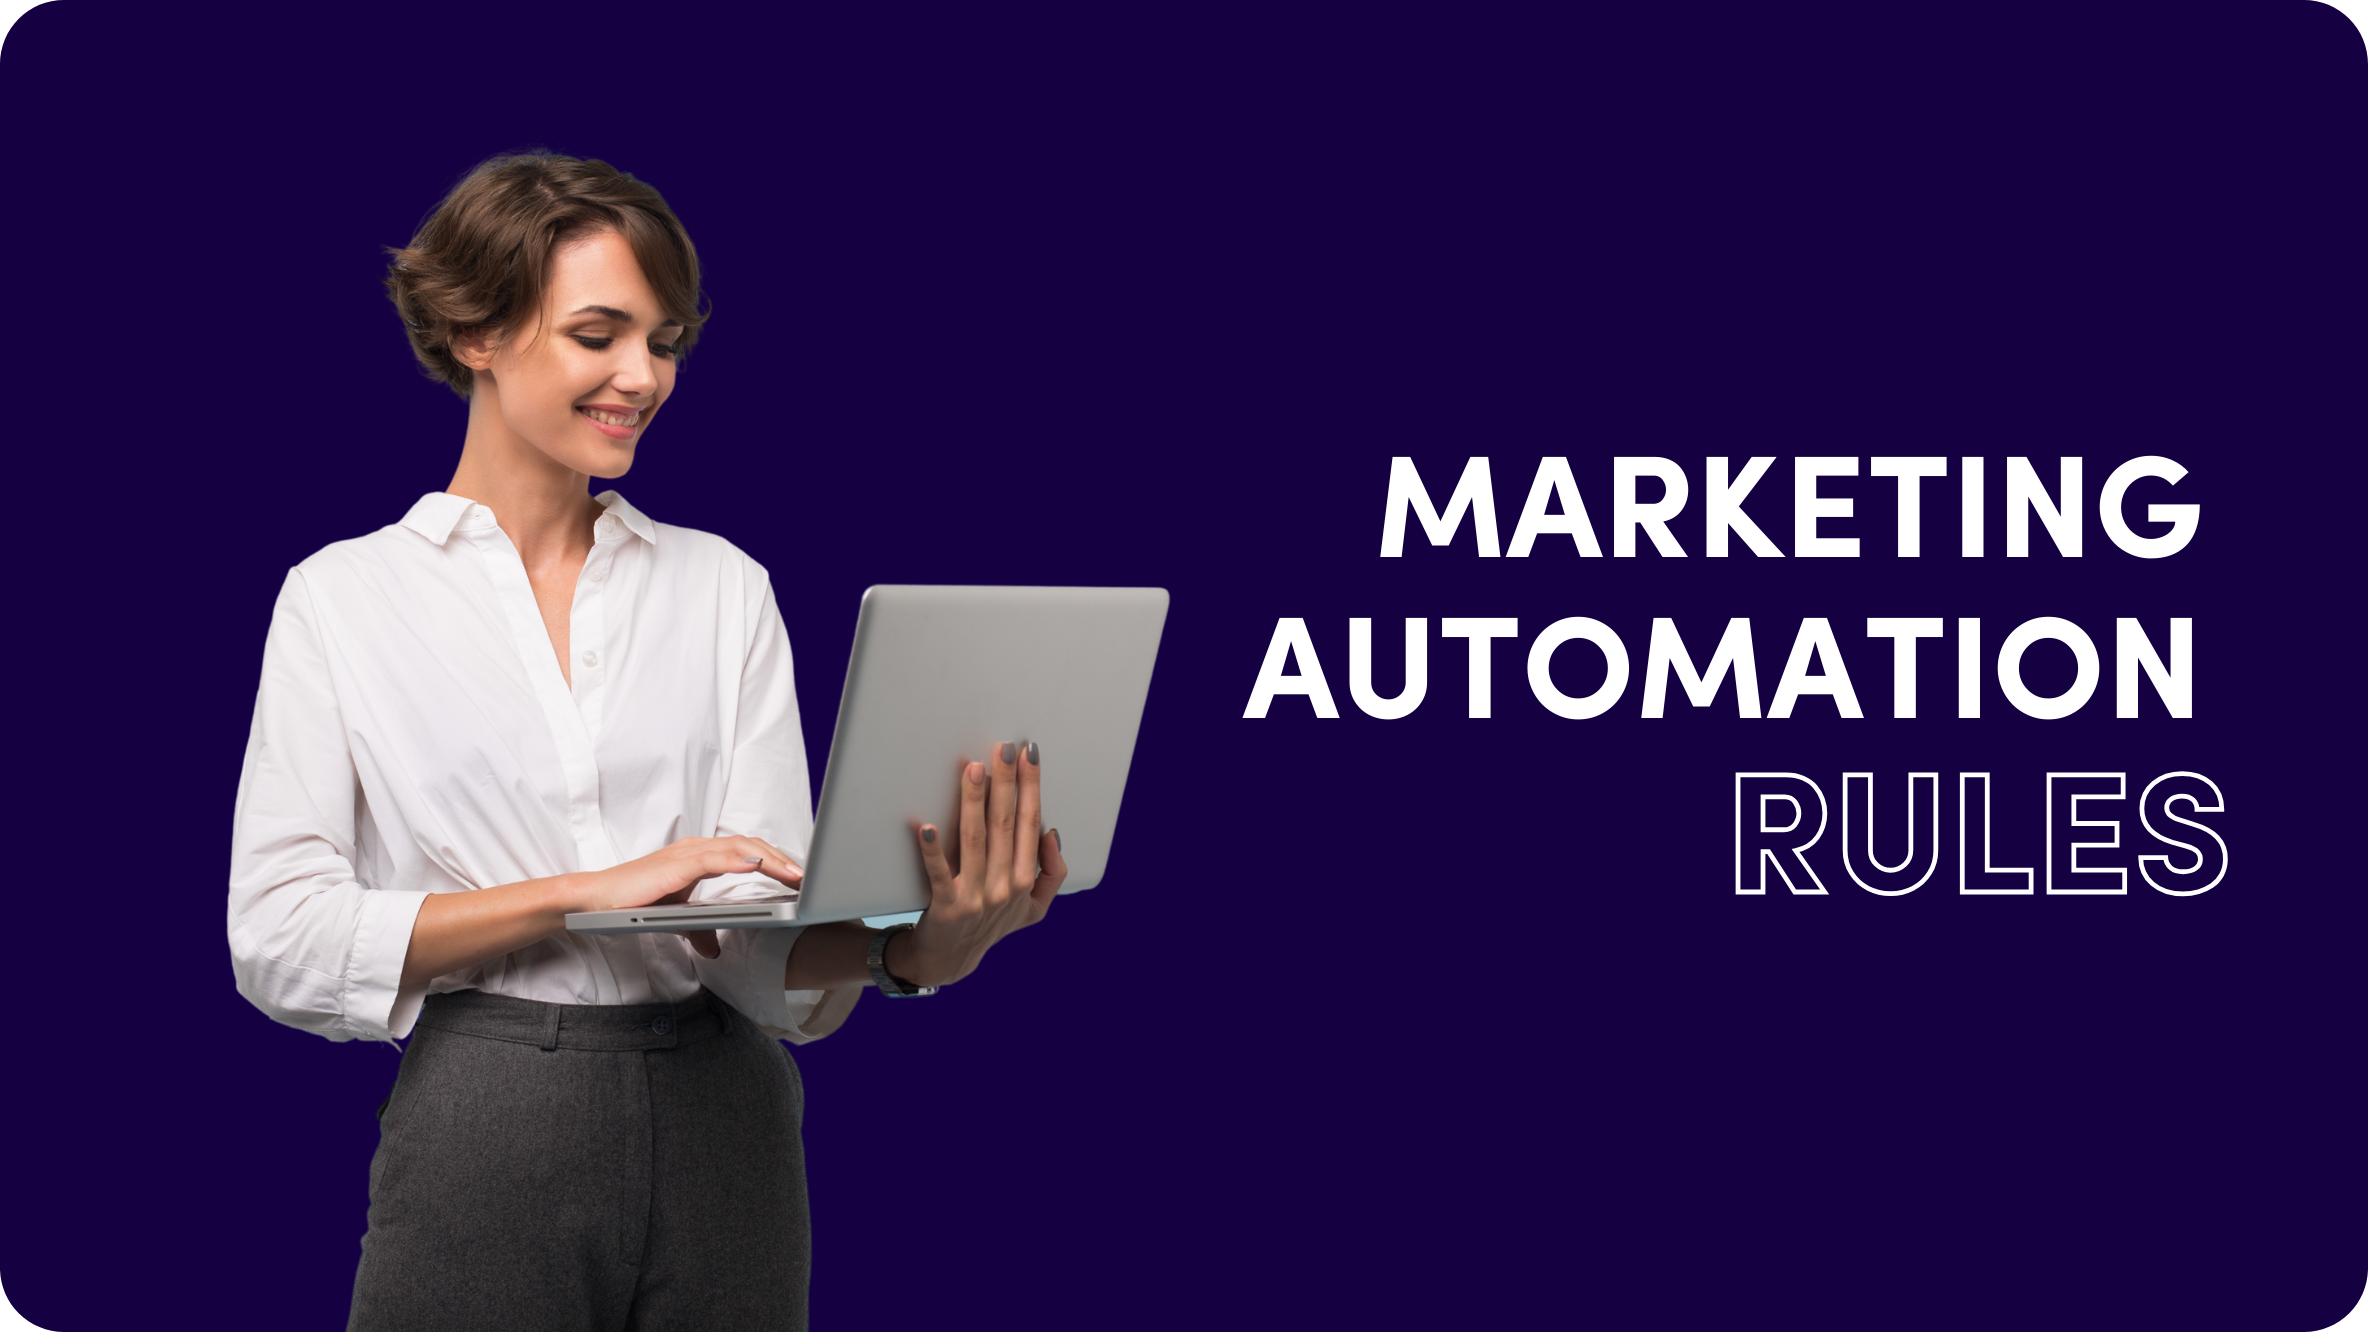 The Guide to Getting Started with Marketing Automation